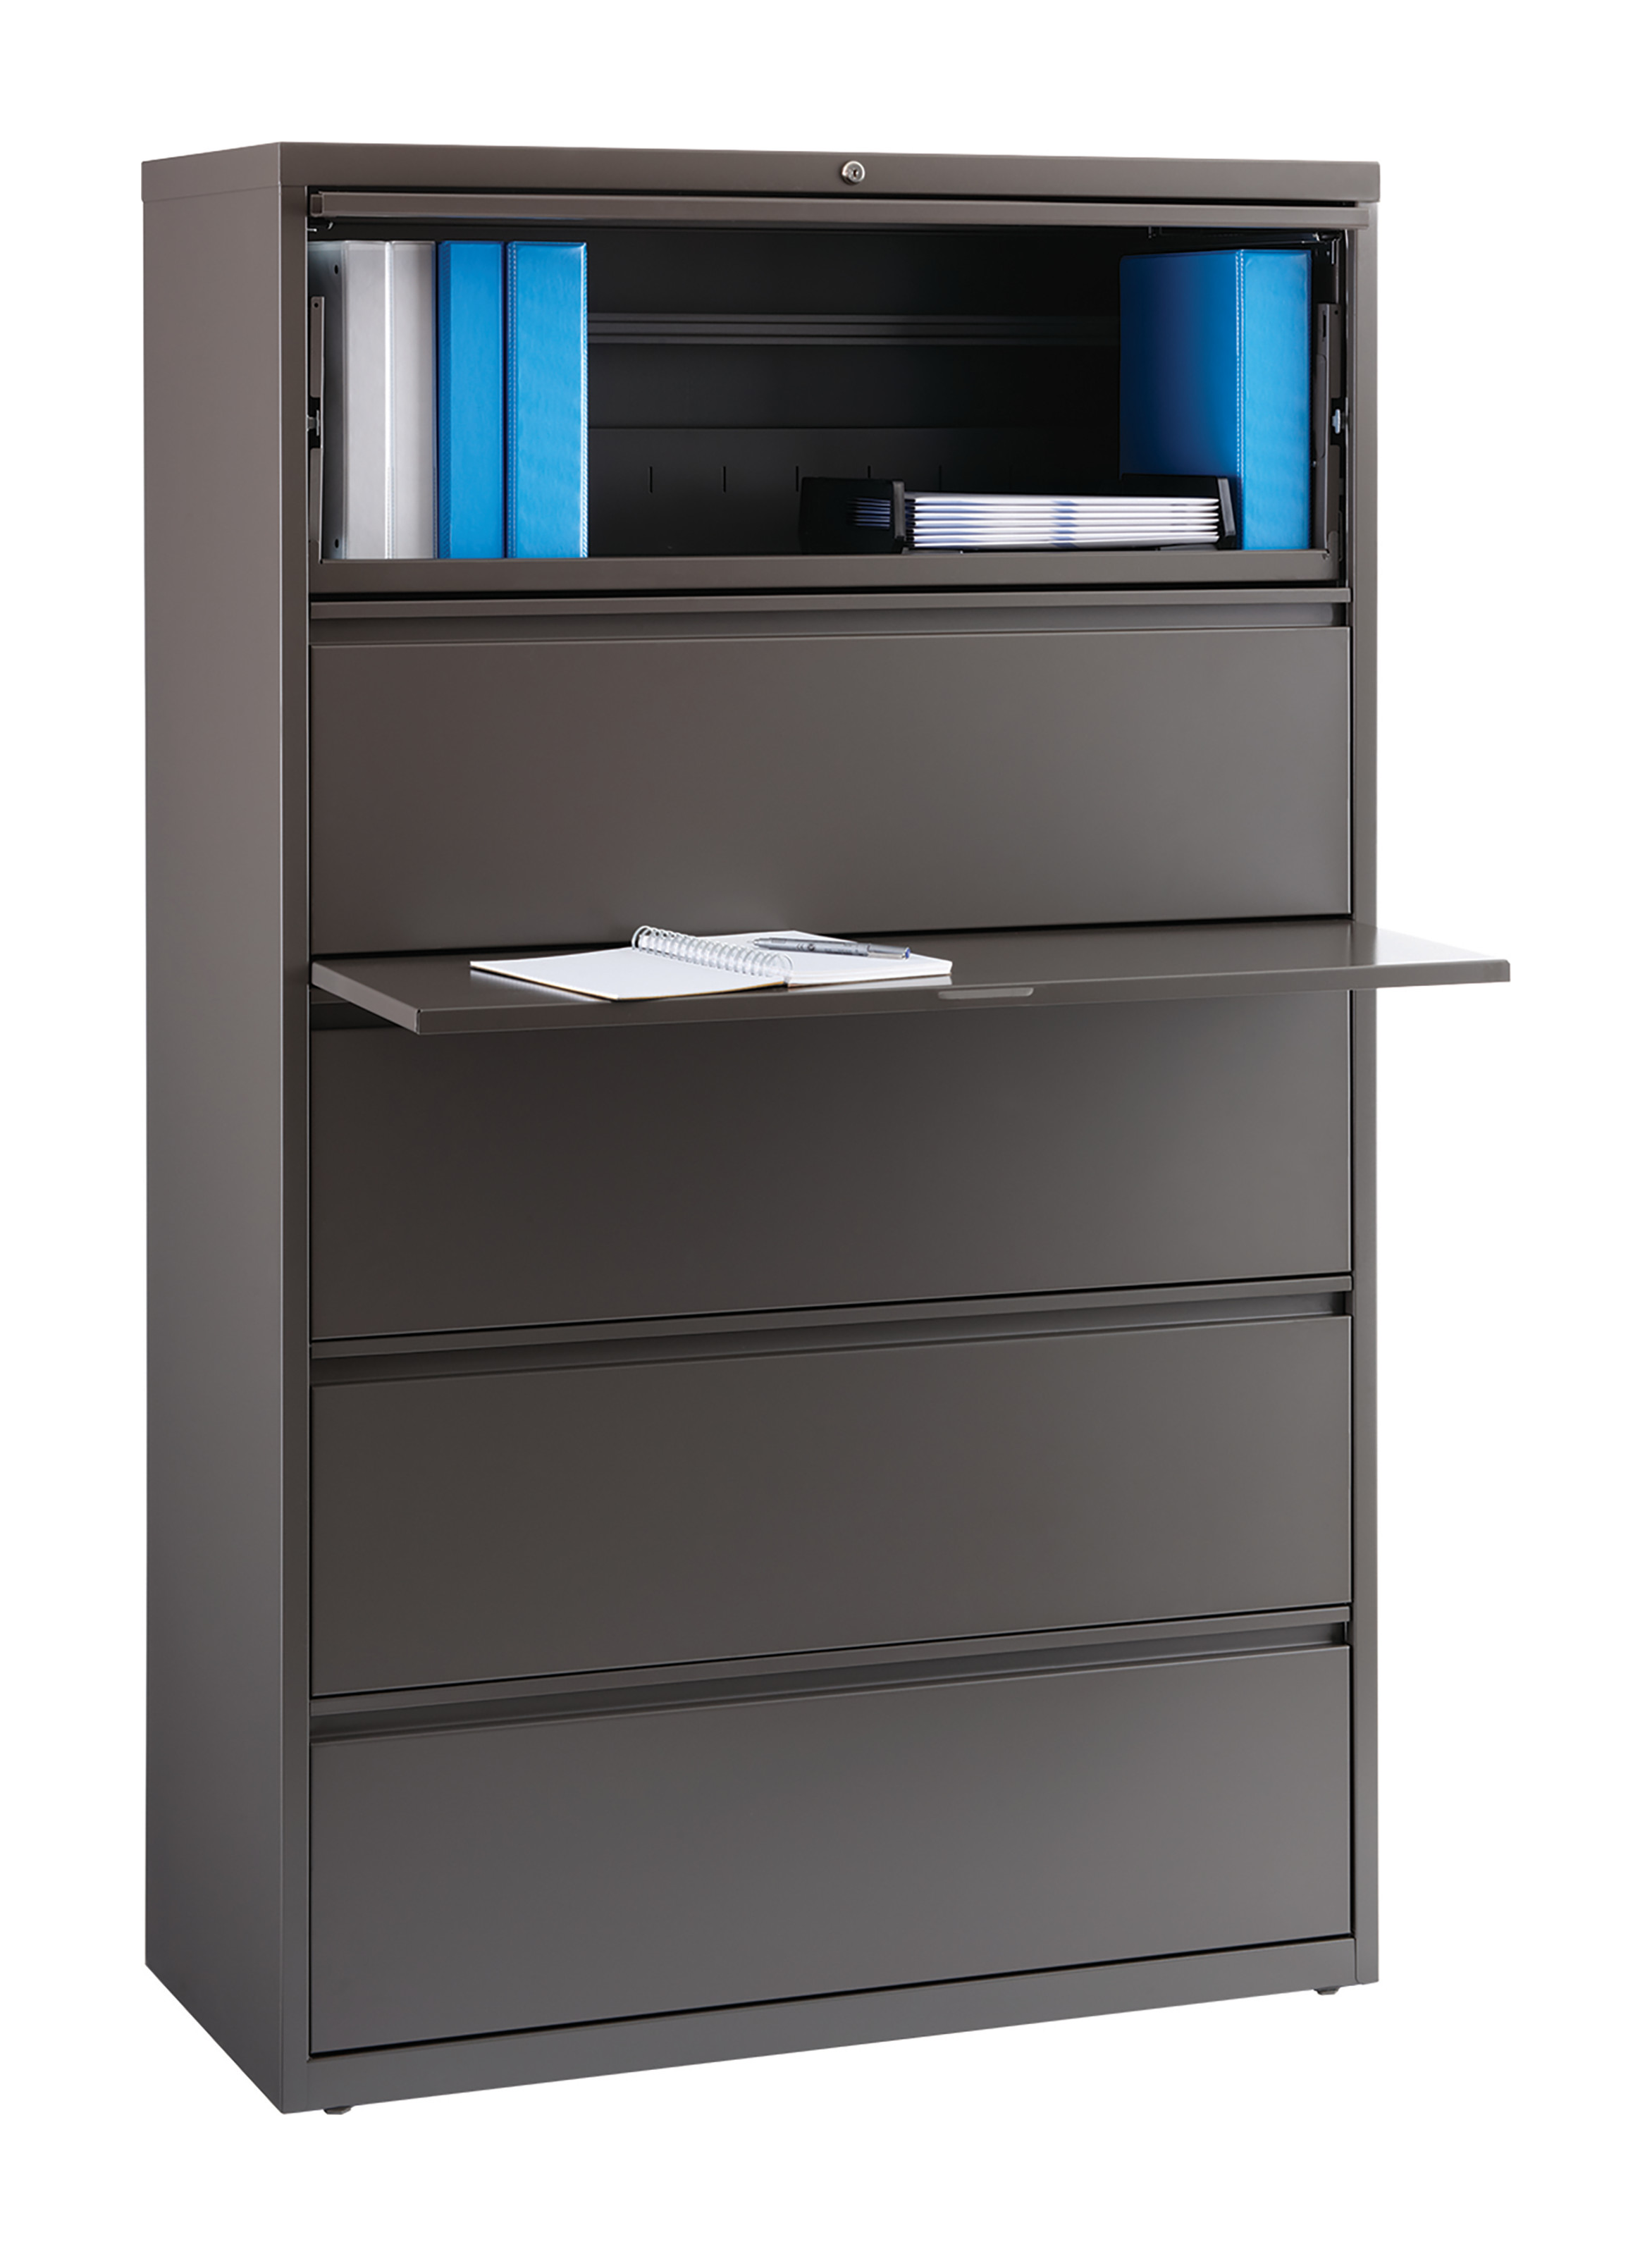 Hirsh 42 inch Wide 5 Drawer Metal Lateral File Cabinet for Home and Office, Holds Letter, Legal and A4 Hanging Folders, Medium Tone Brown - image 4 of 6